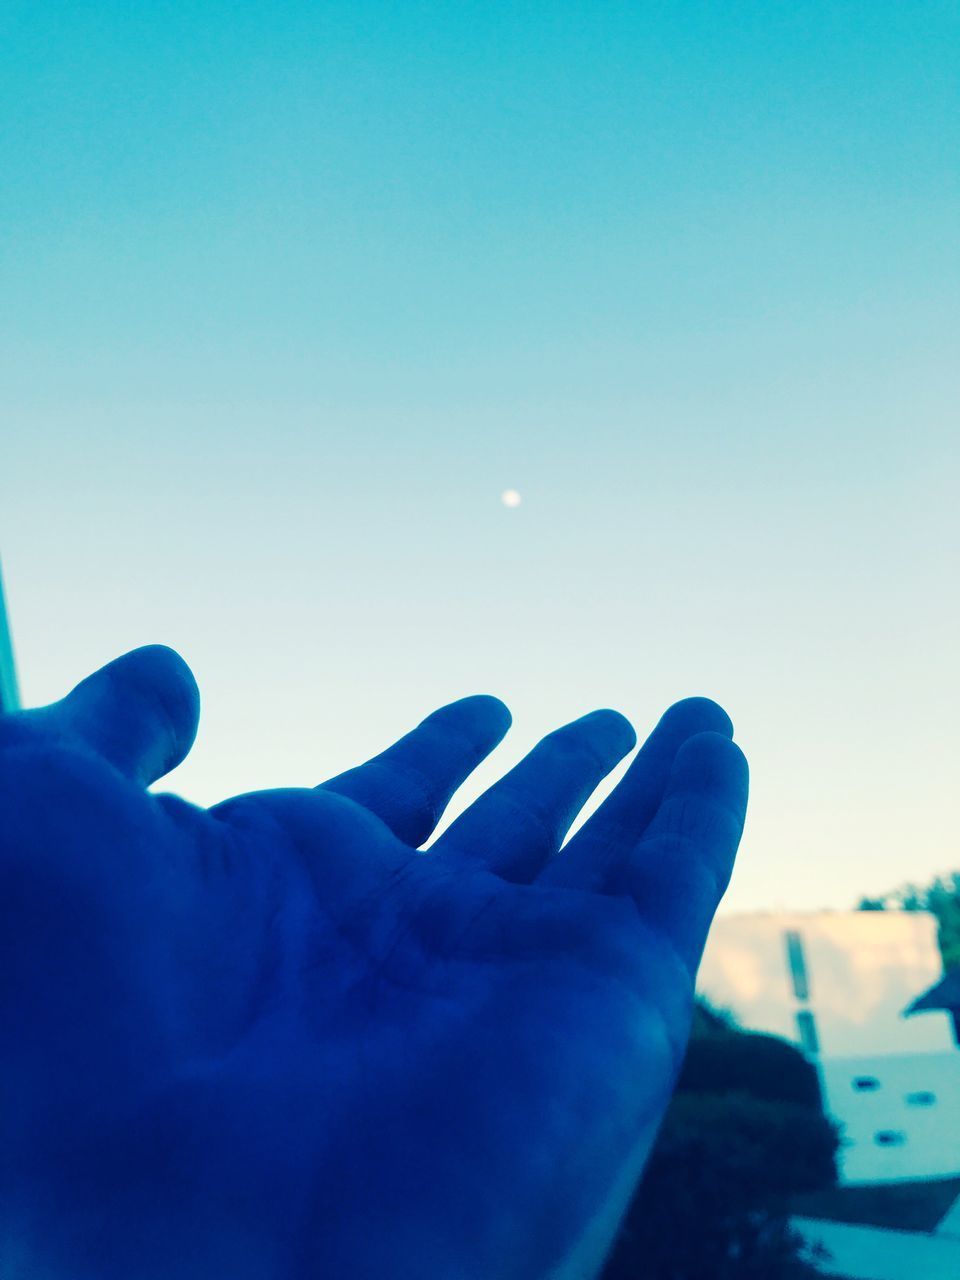 CLOSE-UP OF HAND AGAINST CLEAR SKY